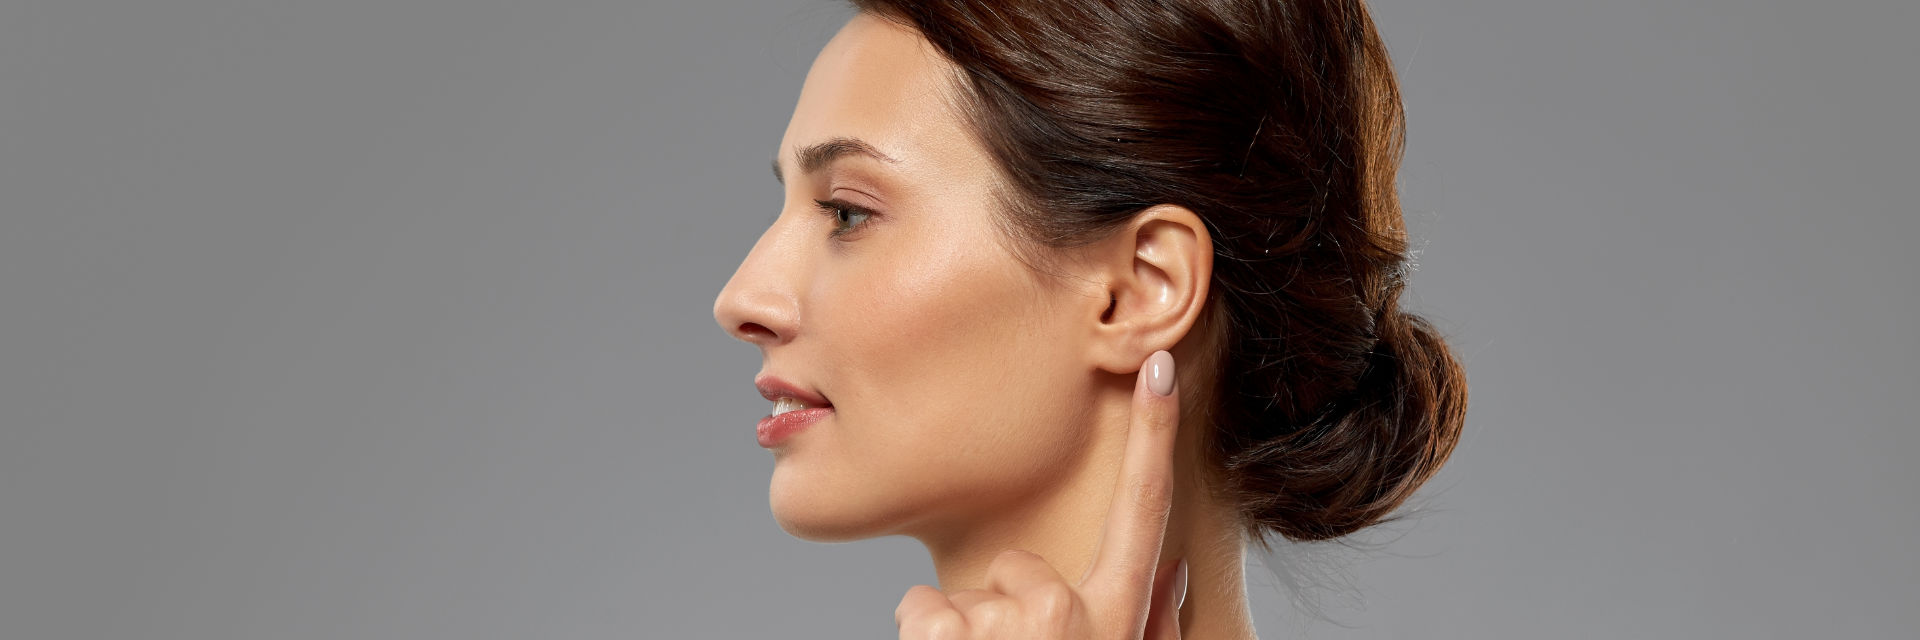 A beautiful woman pointing at her ear.